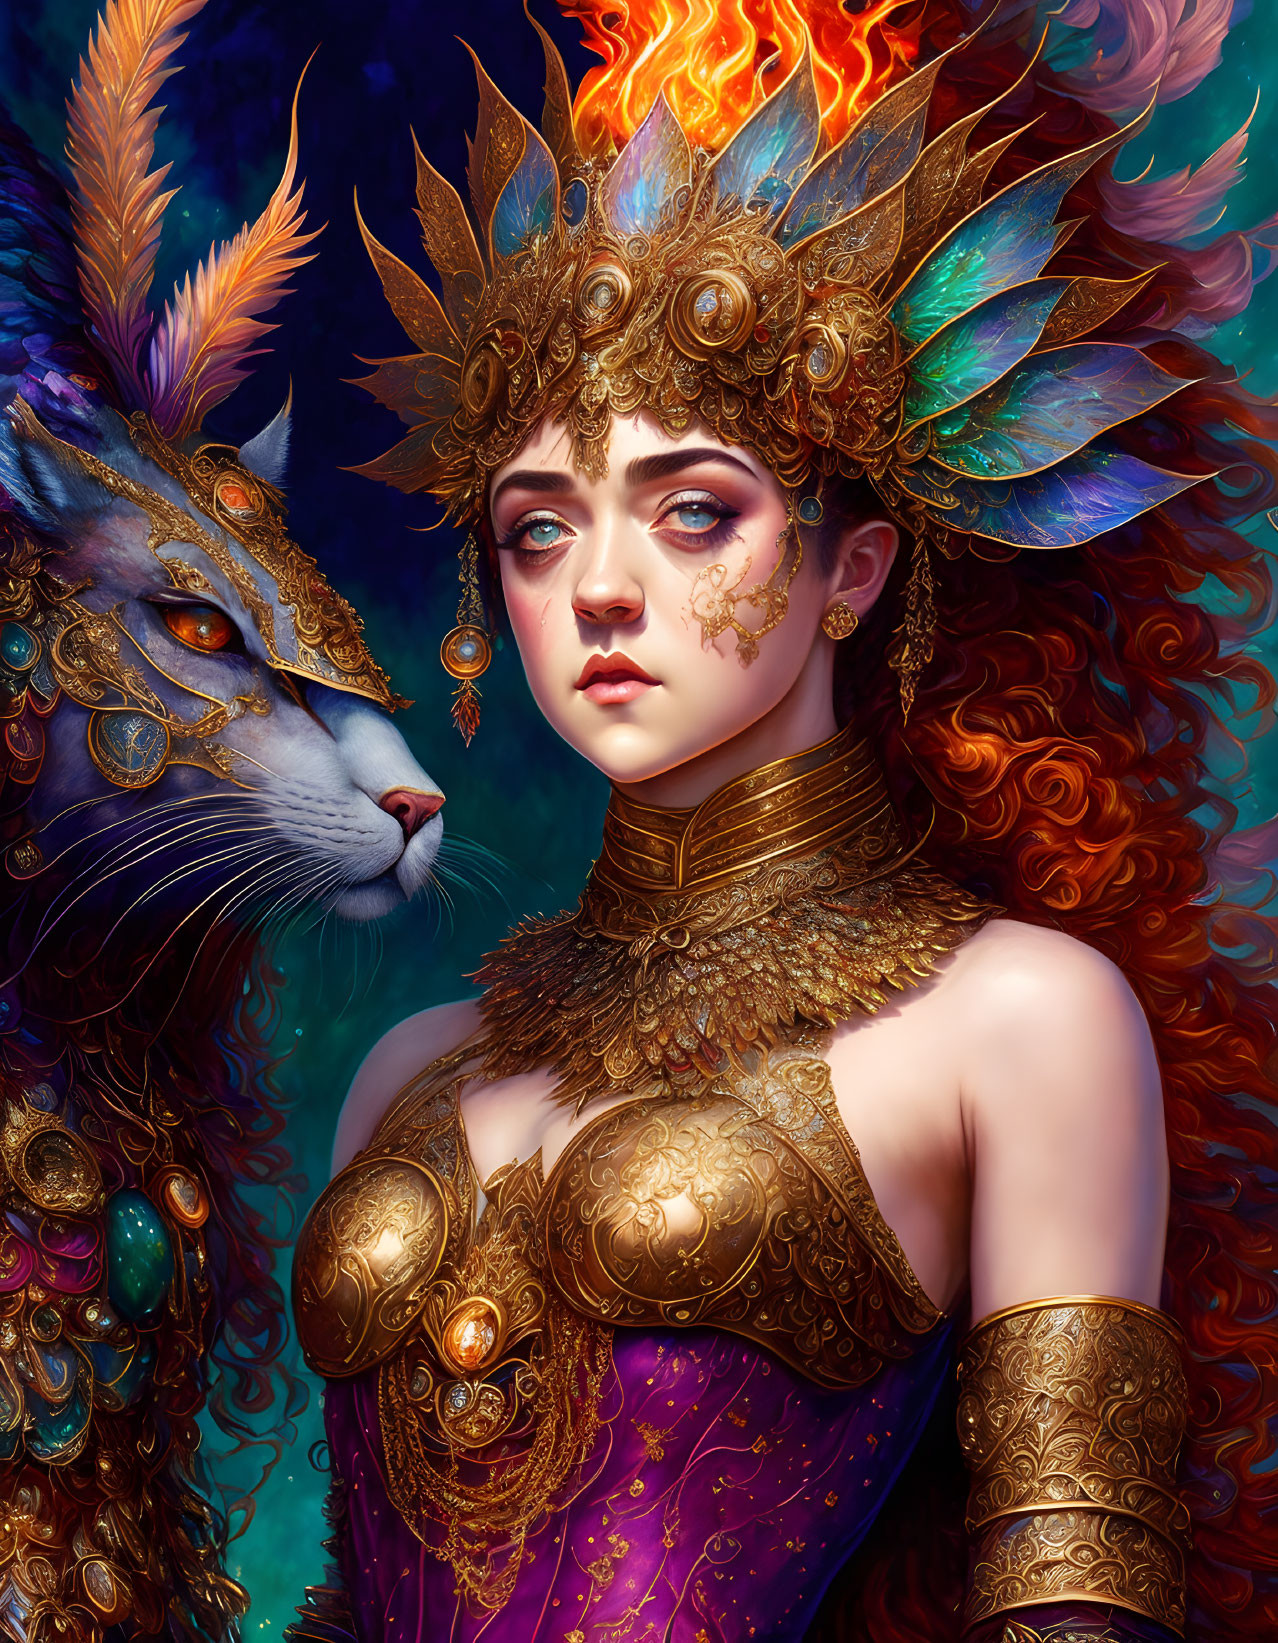 Colorful portrait: woman with golden headgear and majestic lion-like creature adorned with jewels and feathers